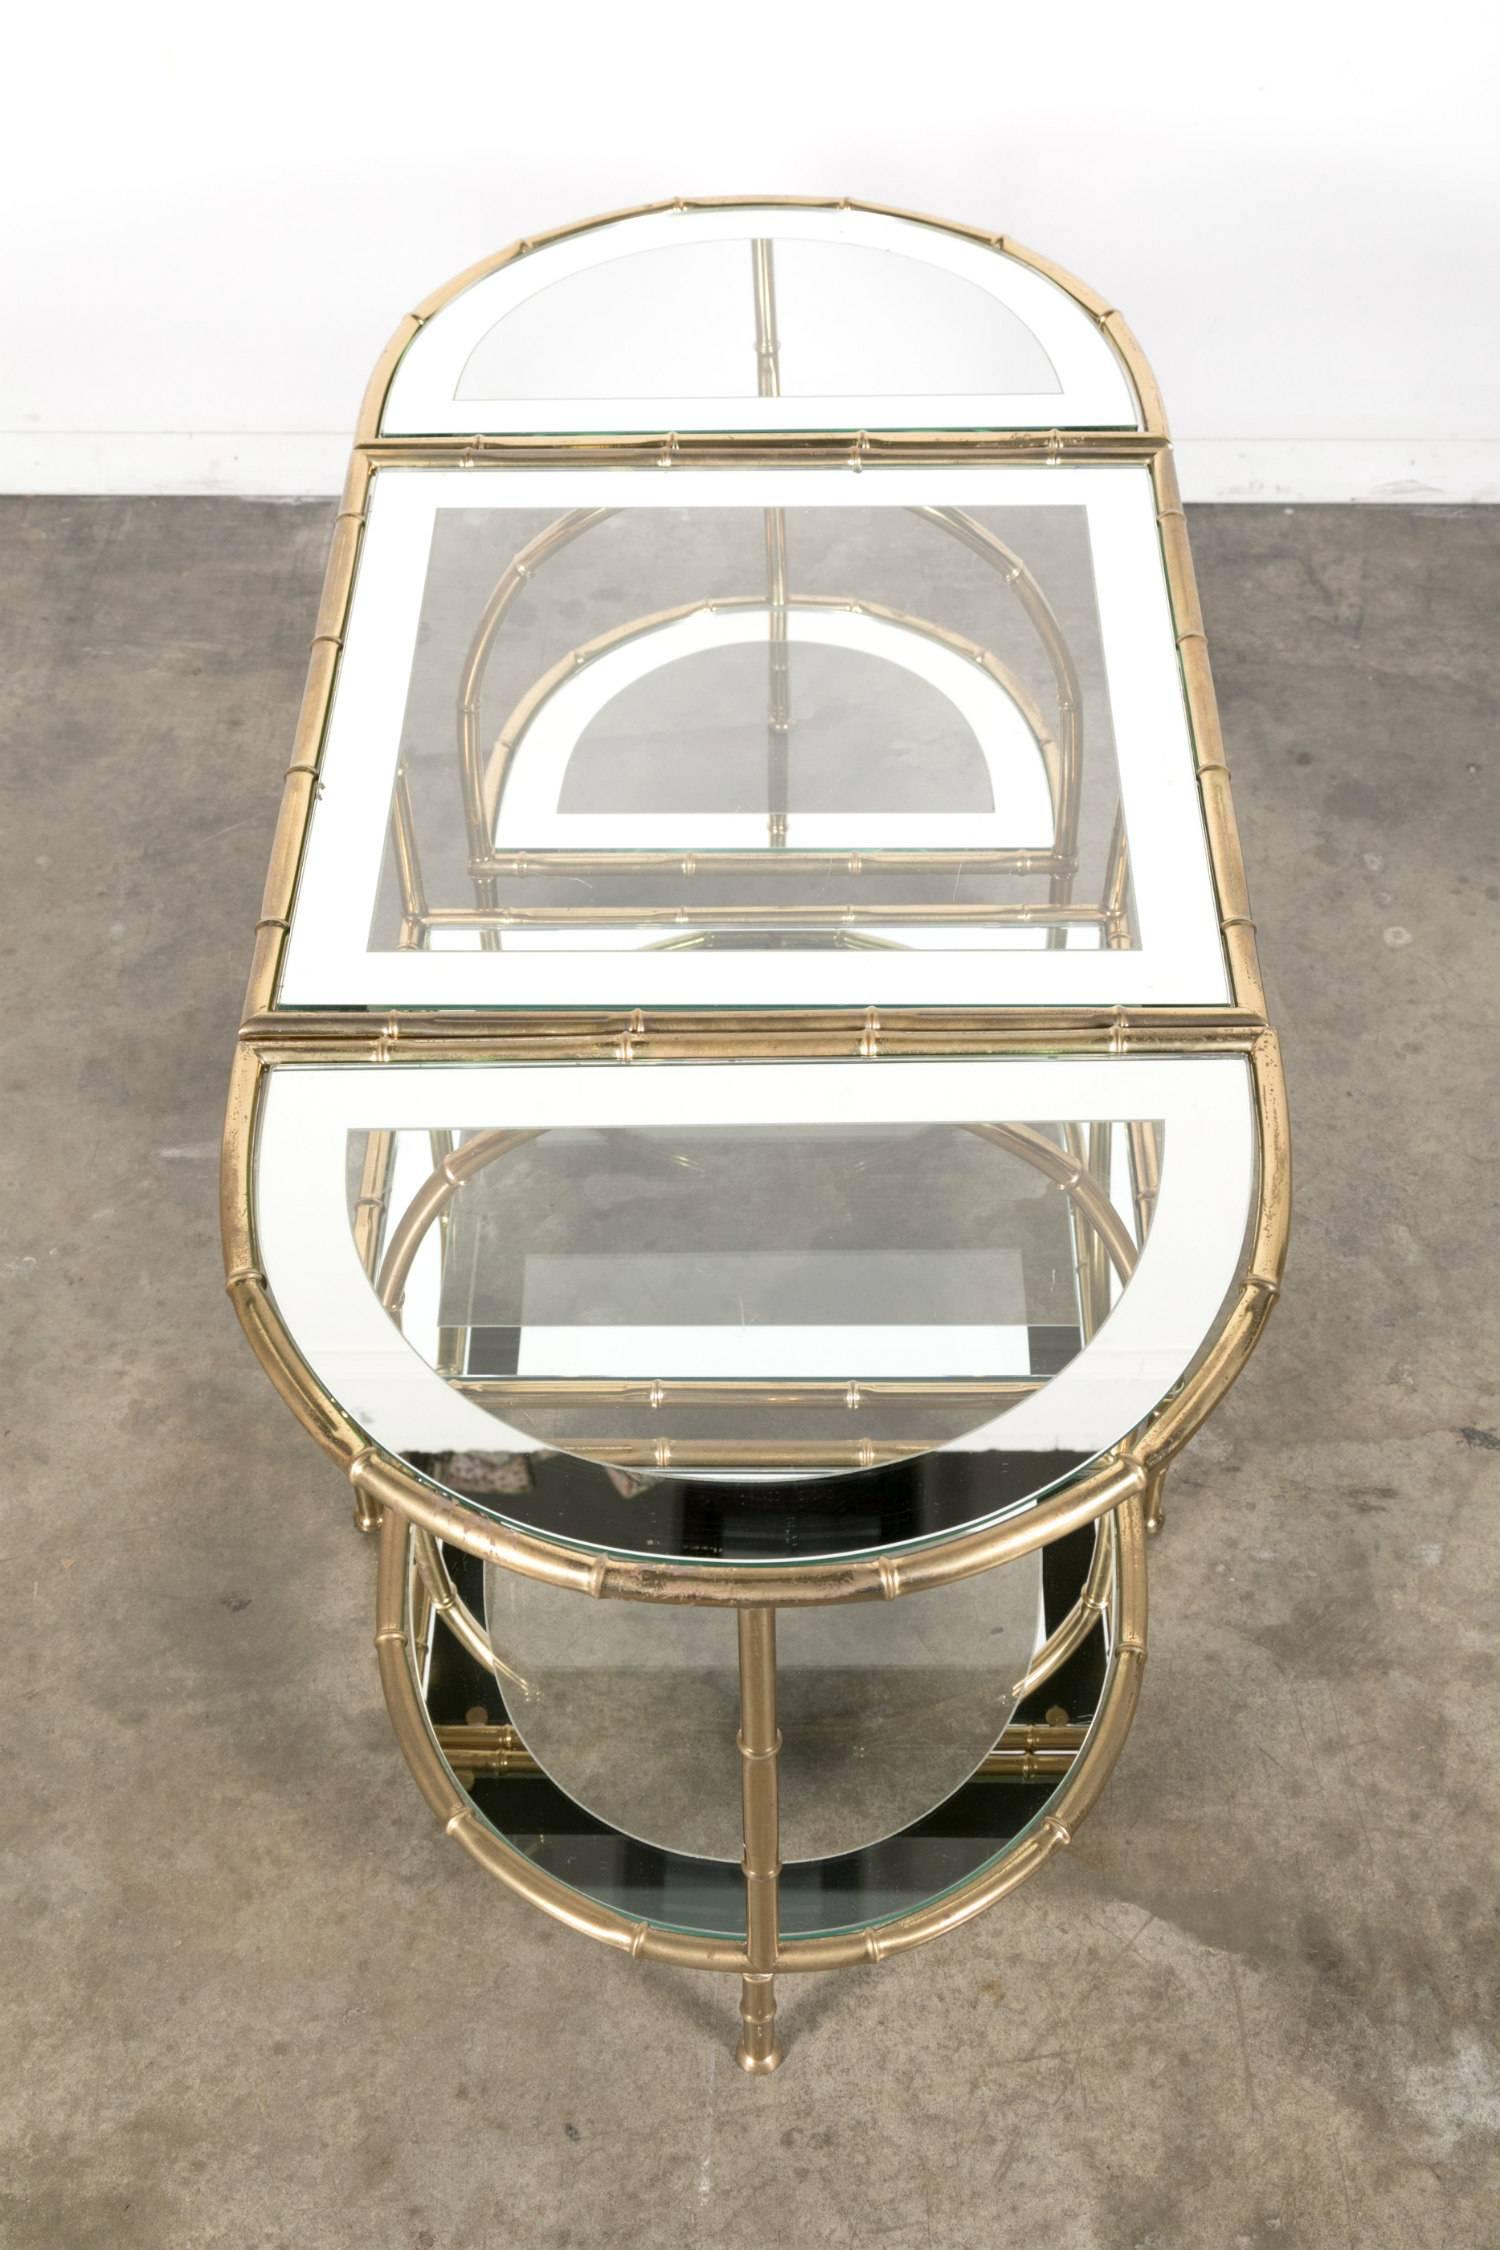 20th Century French Midcentury Brass Faux Bamboo Three-Piece Coffee Table by Maison Baguès